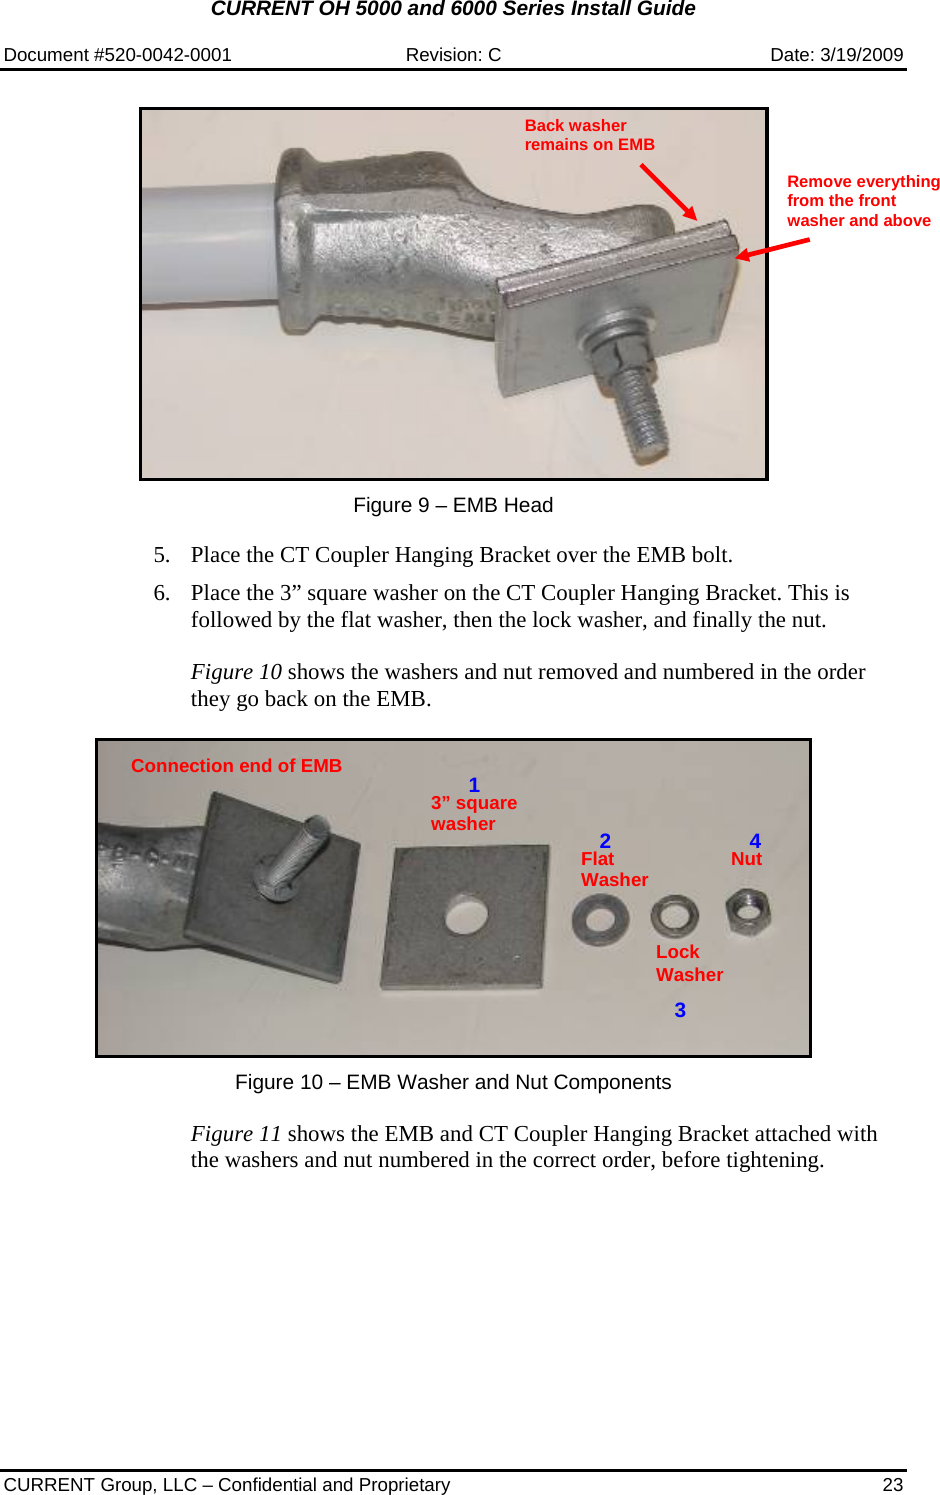 CURRENT OH 5000 and 6000 Series Install Guide  Document #520-0042-0001  Revision: C  Date: 3/19/2009  CURRENT Group, LLC – Confidential and Proprietary  23    Figure 9 – EMB Head   5. Place the CT Coupler Hanging Bracket over the EMB bolt.   6. Place the 3” square washer on the CT Coupler Hanging Bracket. This is followed by the flat washer, then the lock washer, and finally the nut.   Figure 10 shows the washers and nut removed and numbered in the order they go back on the EMB.     Figure 10 – EMB Washer and Nut Components   Figure 11 shows the EMB and CT Coupler Hanging Bracket attached with the washers and nut numbered in the correct order, before tightening. Connection end of EMB 3” square washerFlat WasherLock Washer Nut 1234 Remove everything from the front washer and above Back washer remains on EMB 